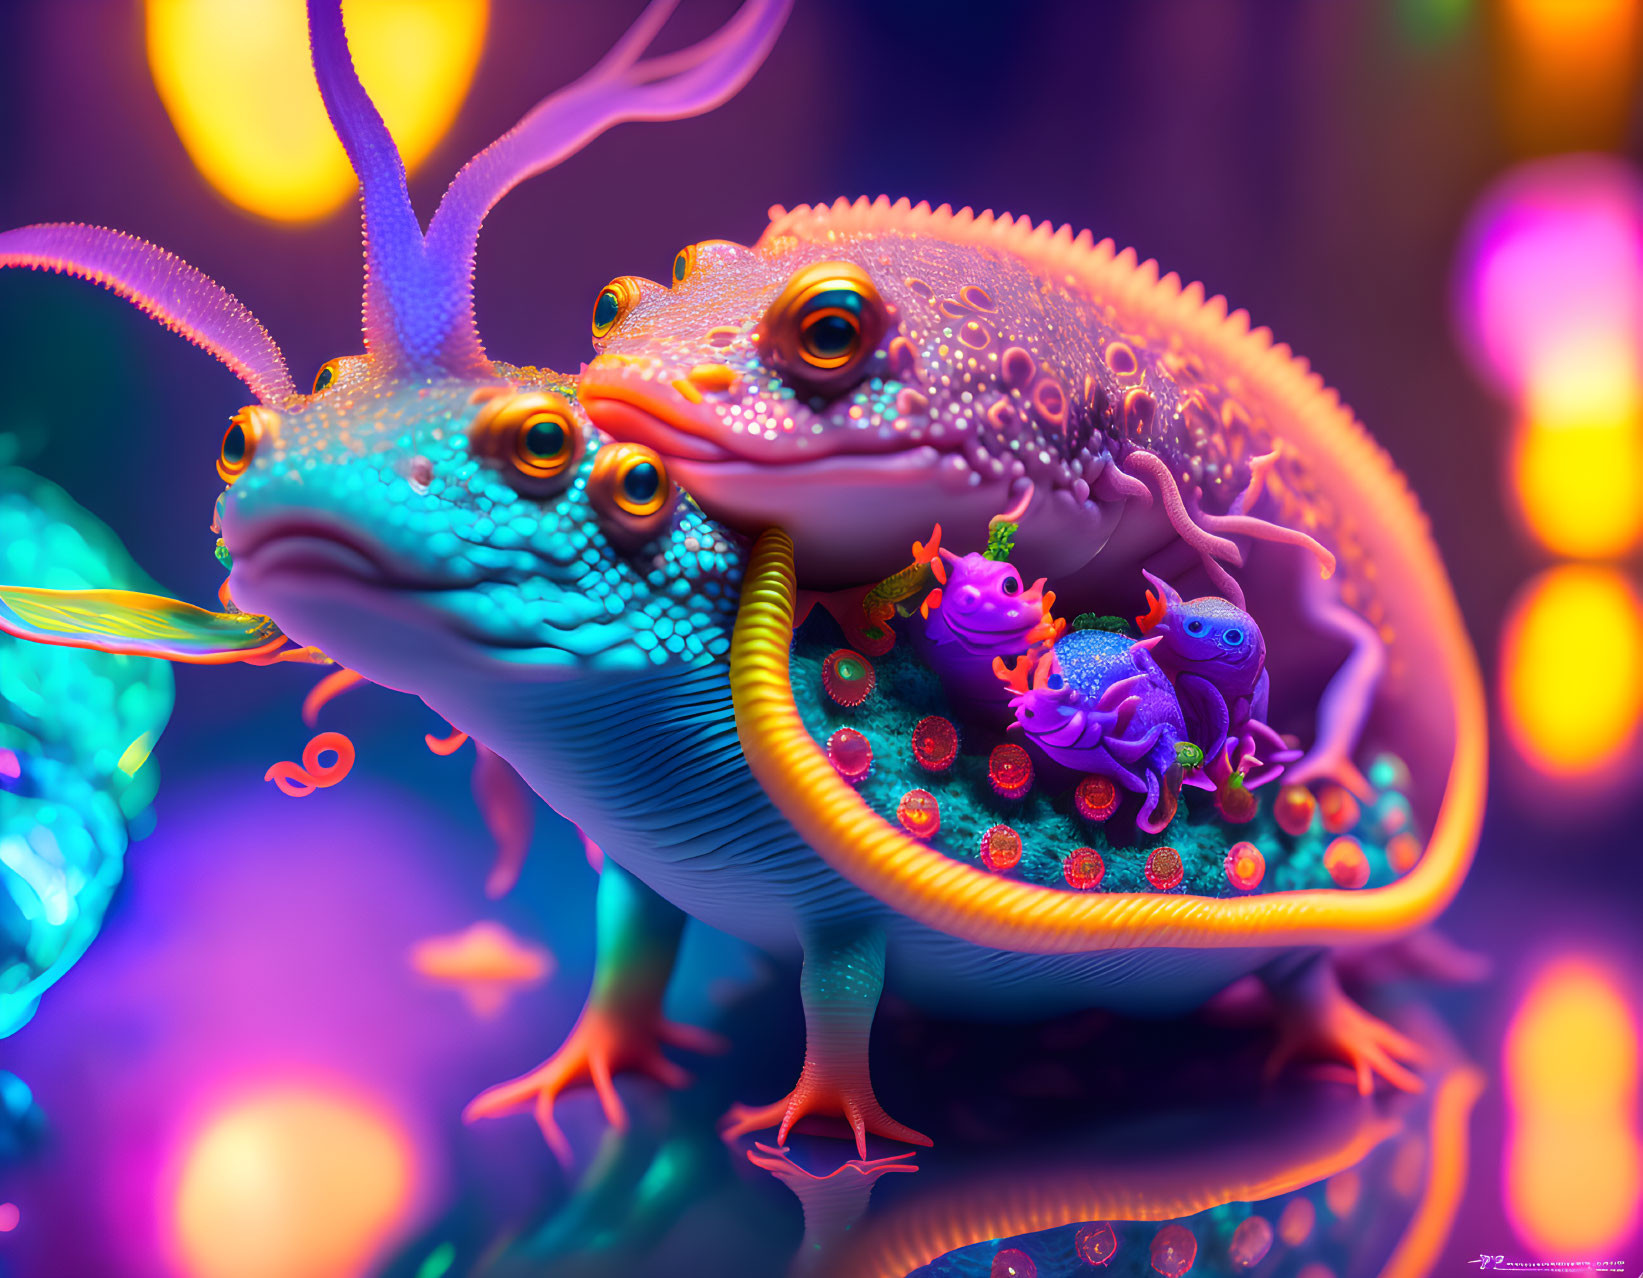 Colorful fantasy creature with intricate textures and smaller creatures in digital art